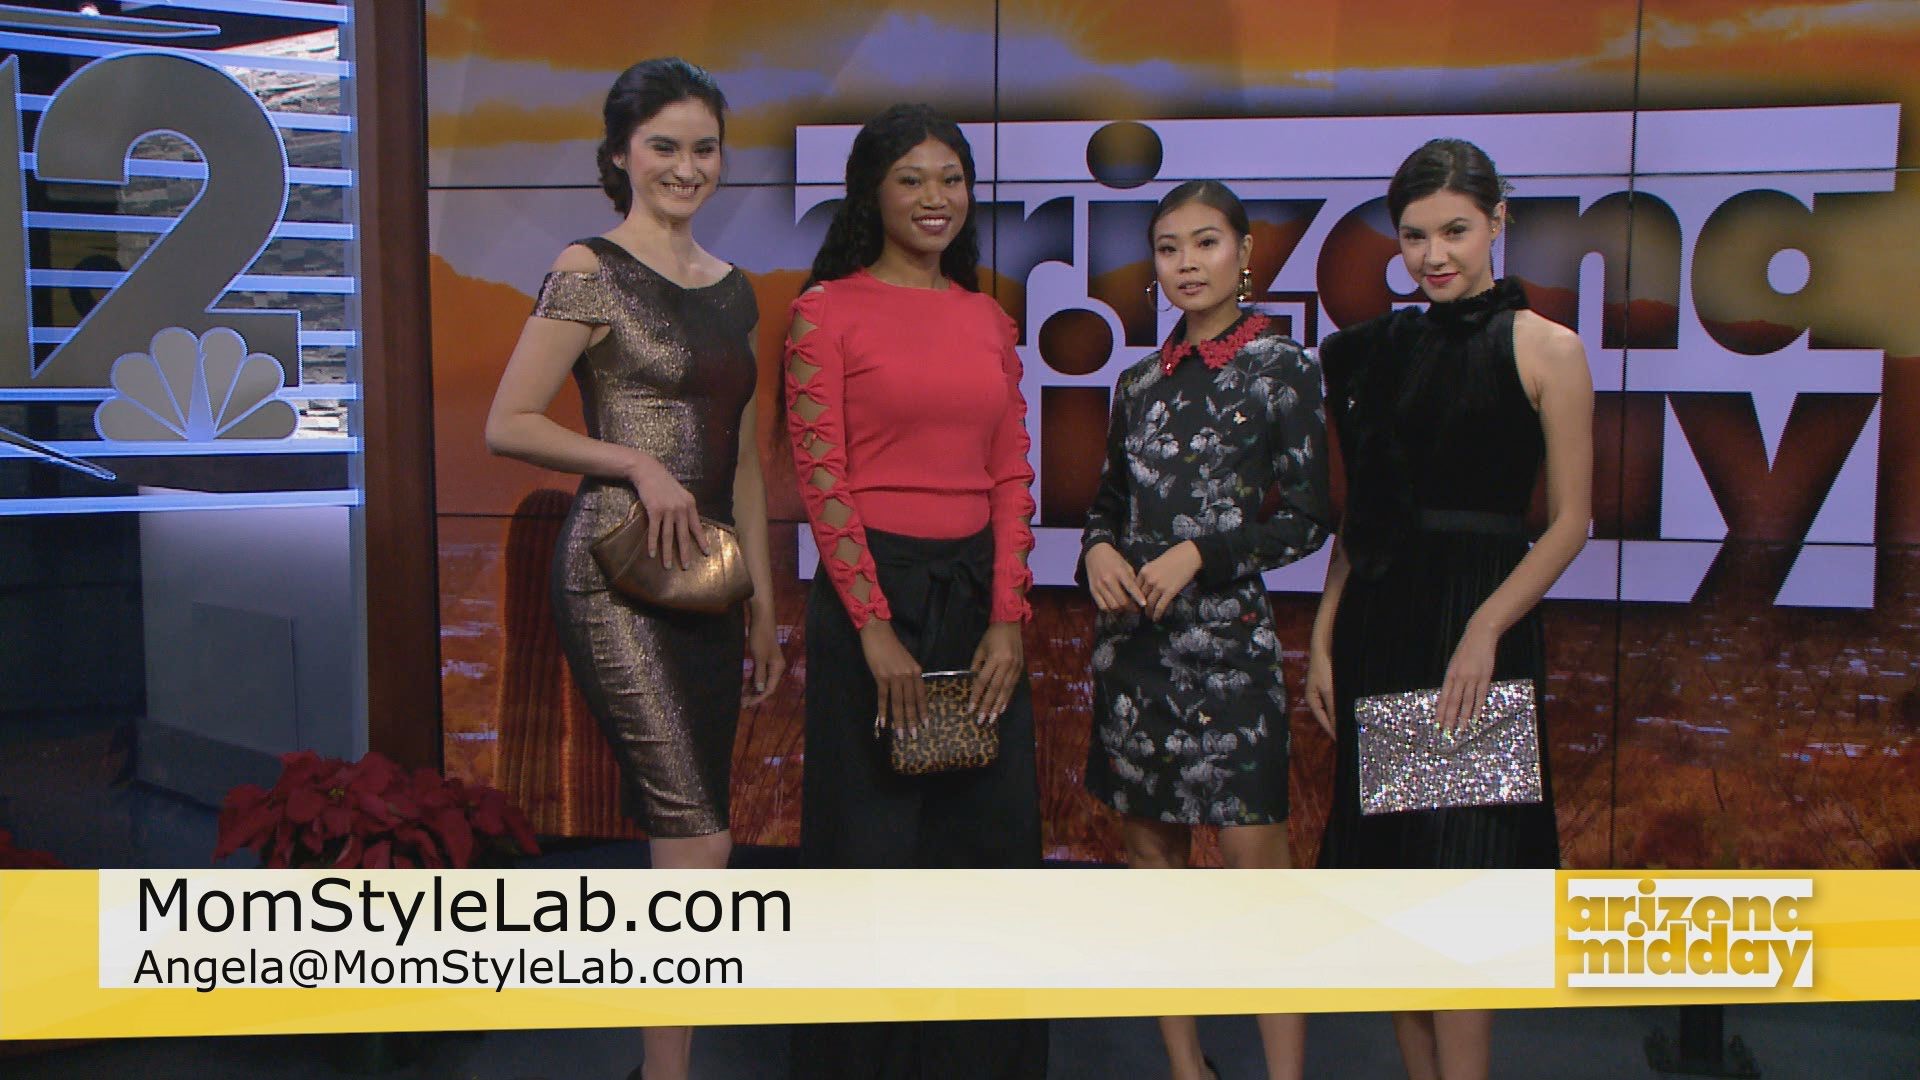 From flowers, to metallic, faux fur and more Angela Keller of Mom Style Lab shows us some great holiday style.